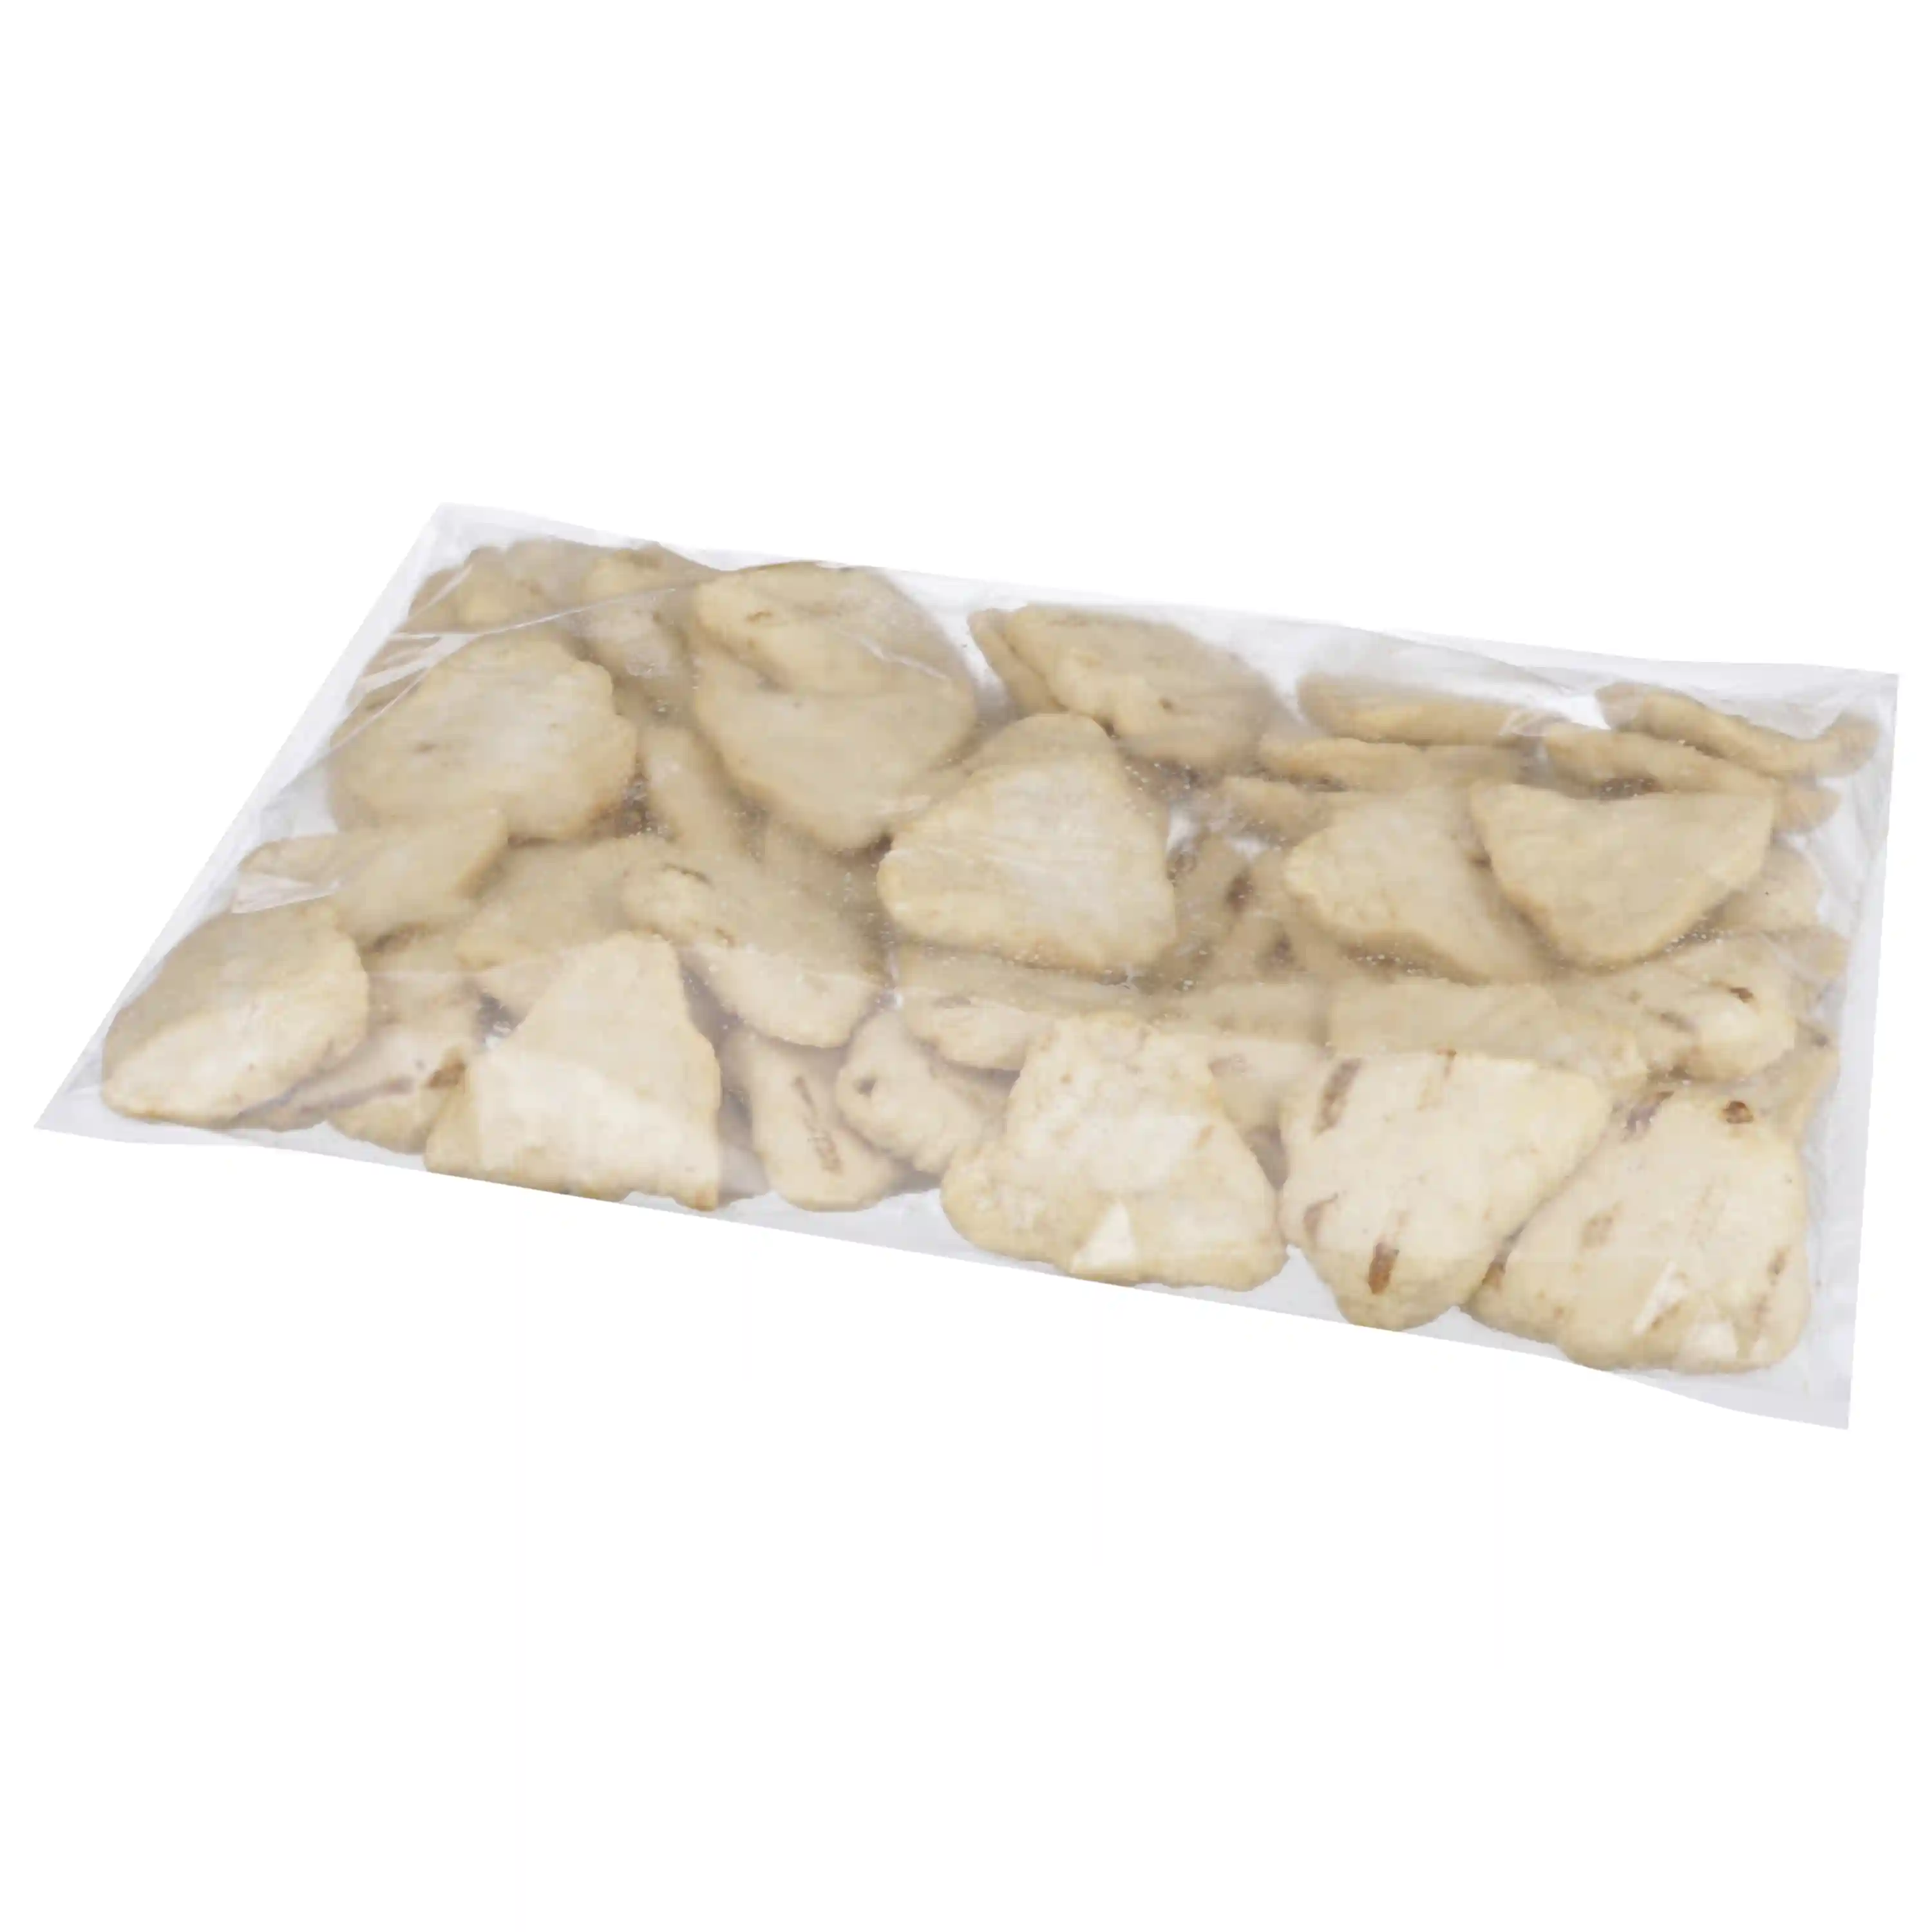 Tyson® Fully Cooked Grilled MWWM Chicken Breast Filets, 2.26 oz. _image_11